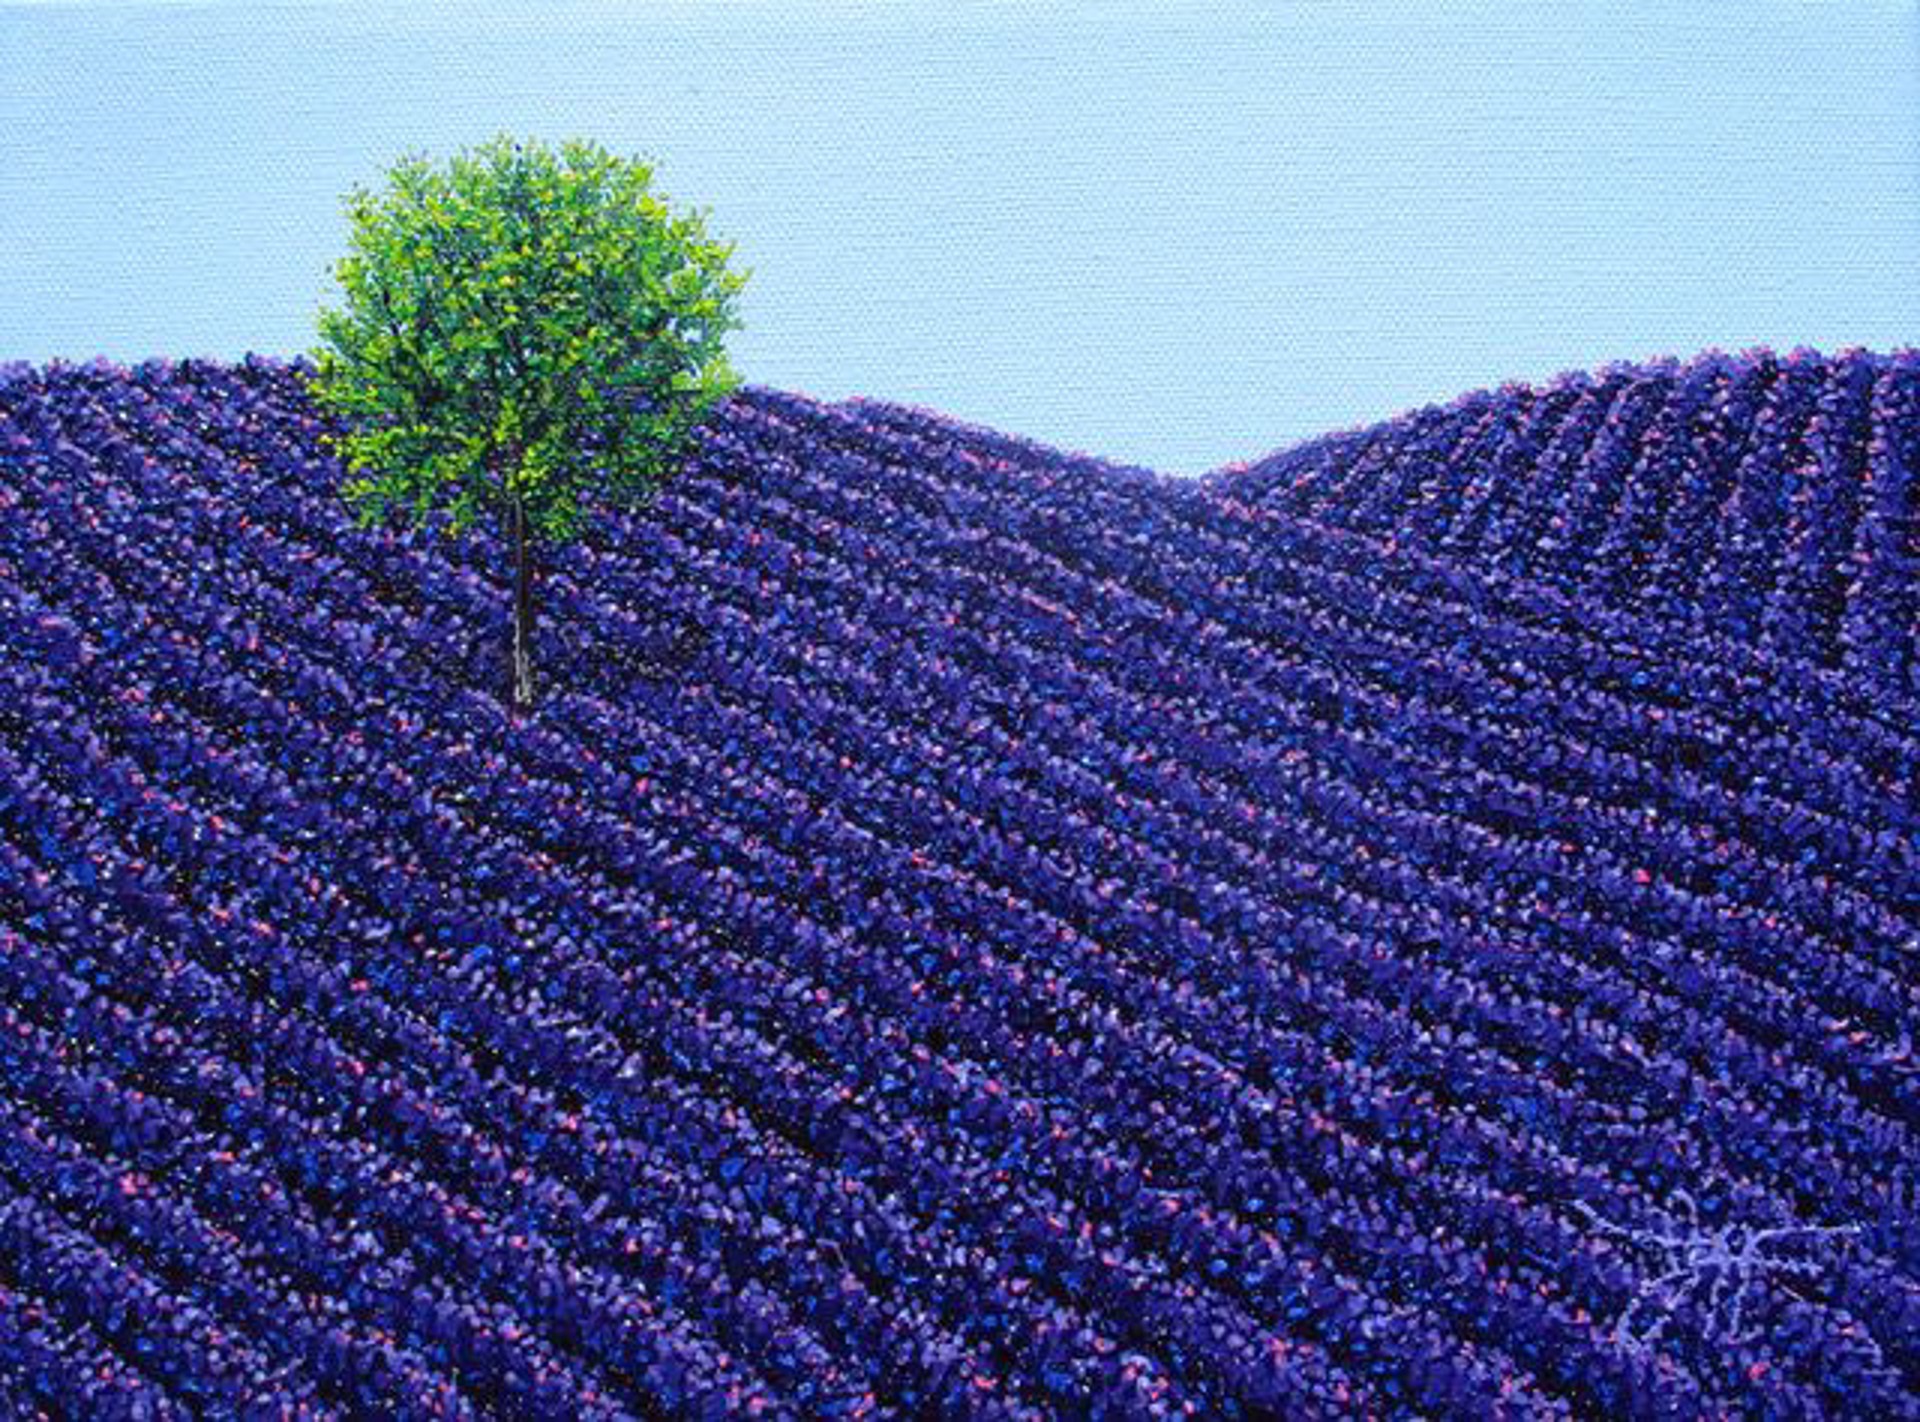 Rows of Lavender by Jay Maggio